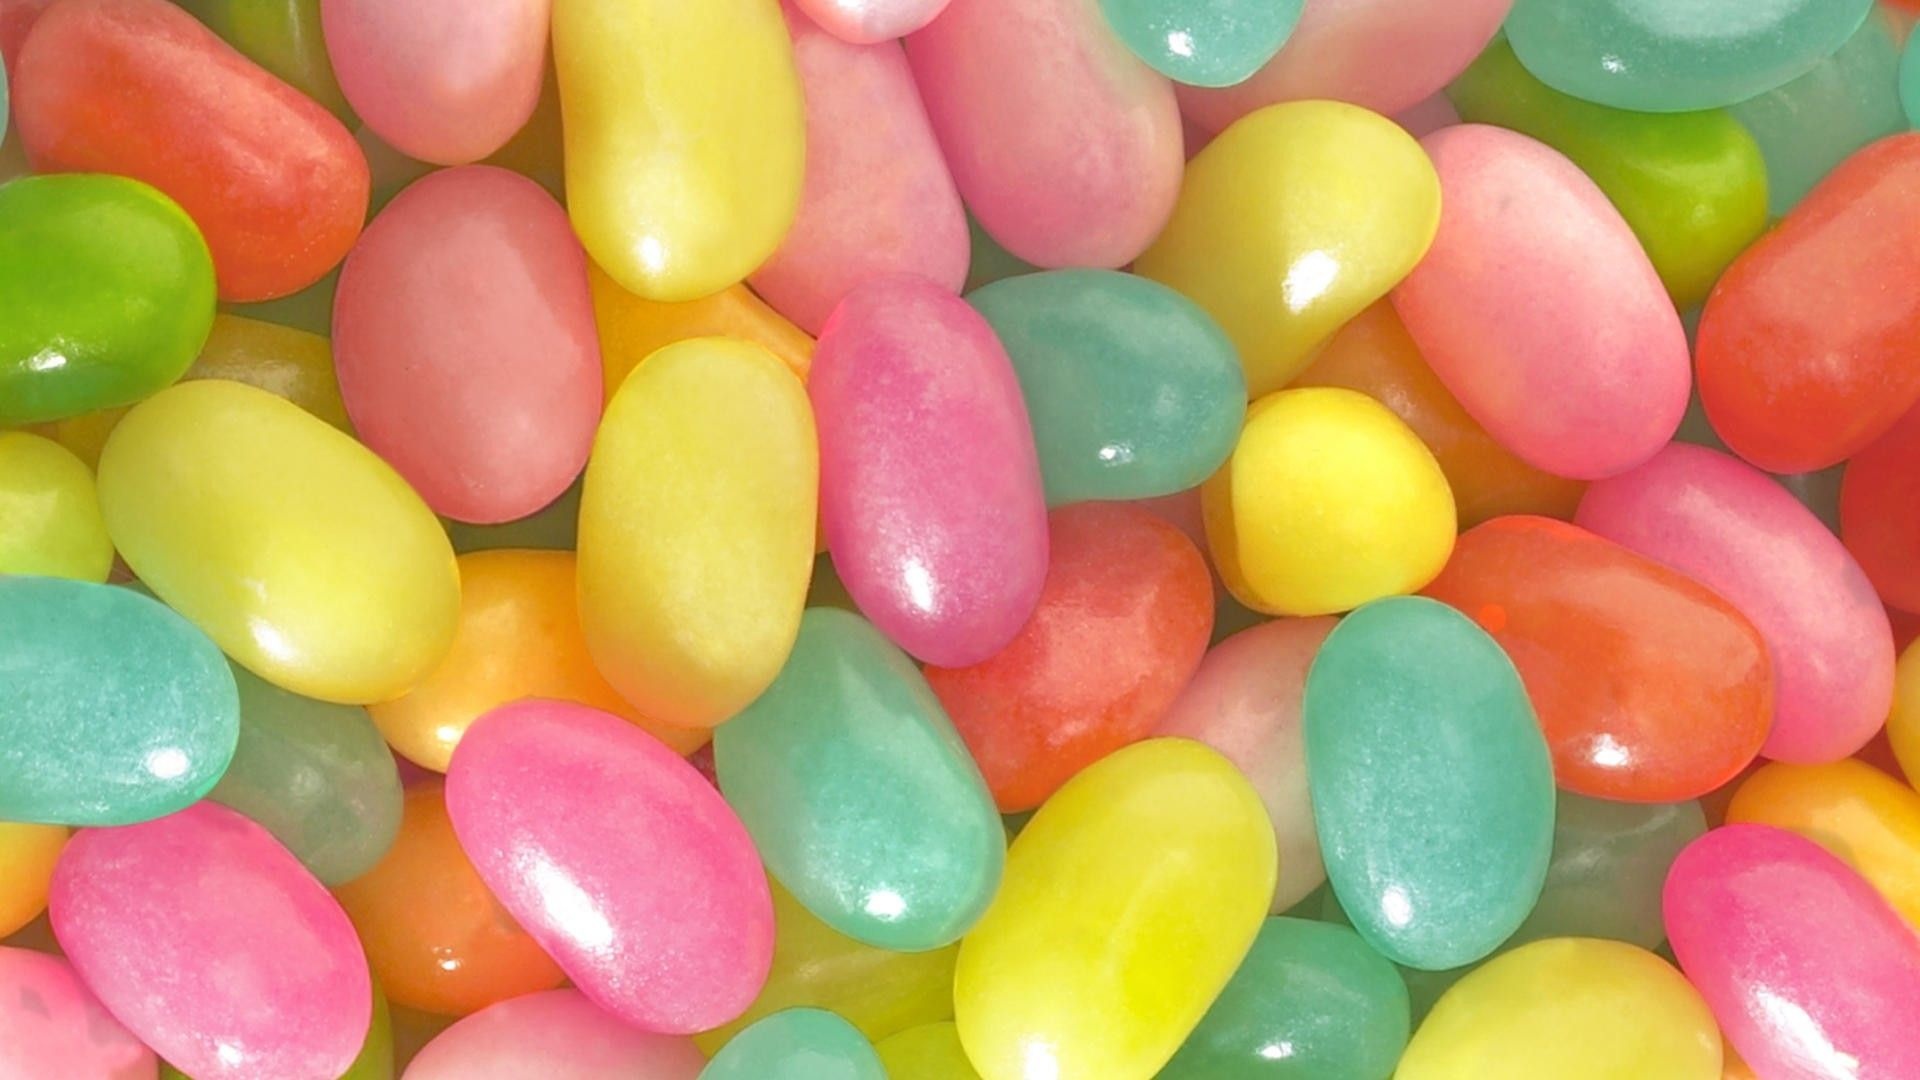 Jelly Beans, Vibrant backgrounds, Flavorful candies, Sweet indulgence, 1920x1080 Full HD Desktop